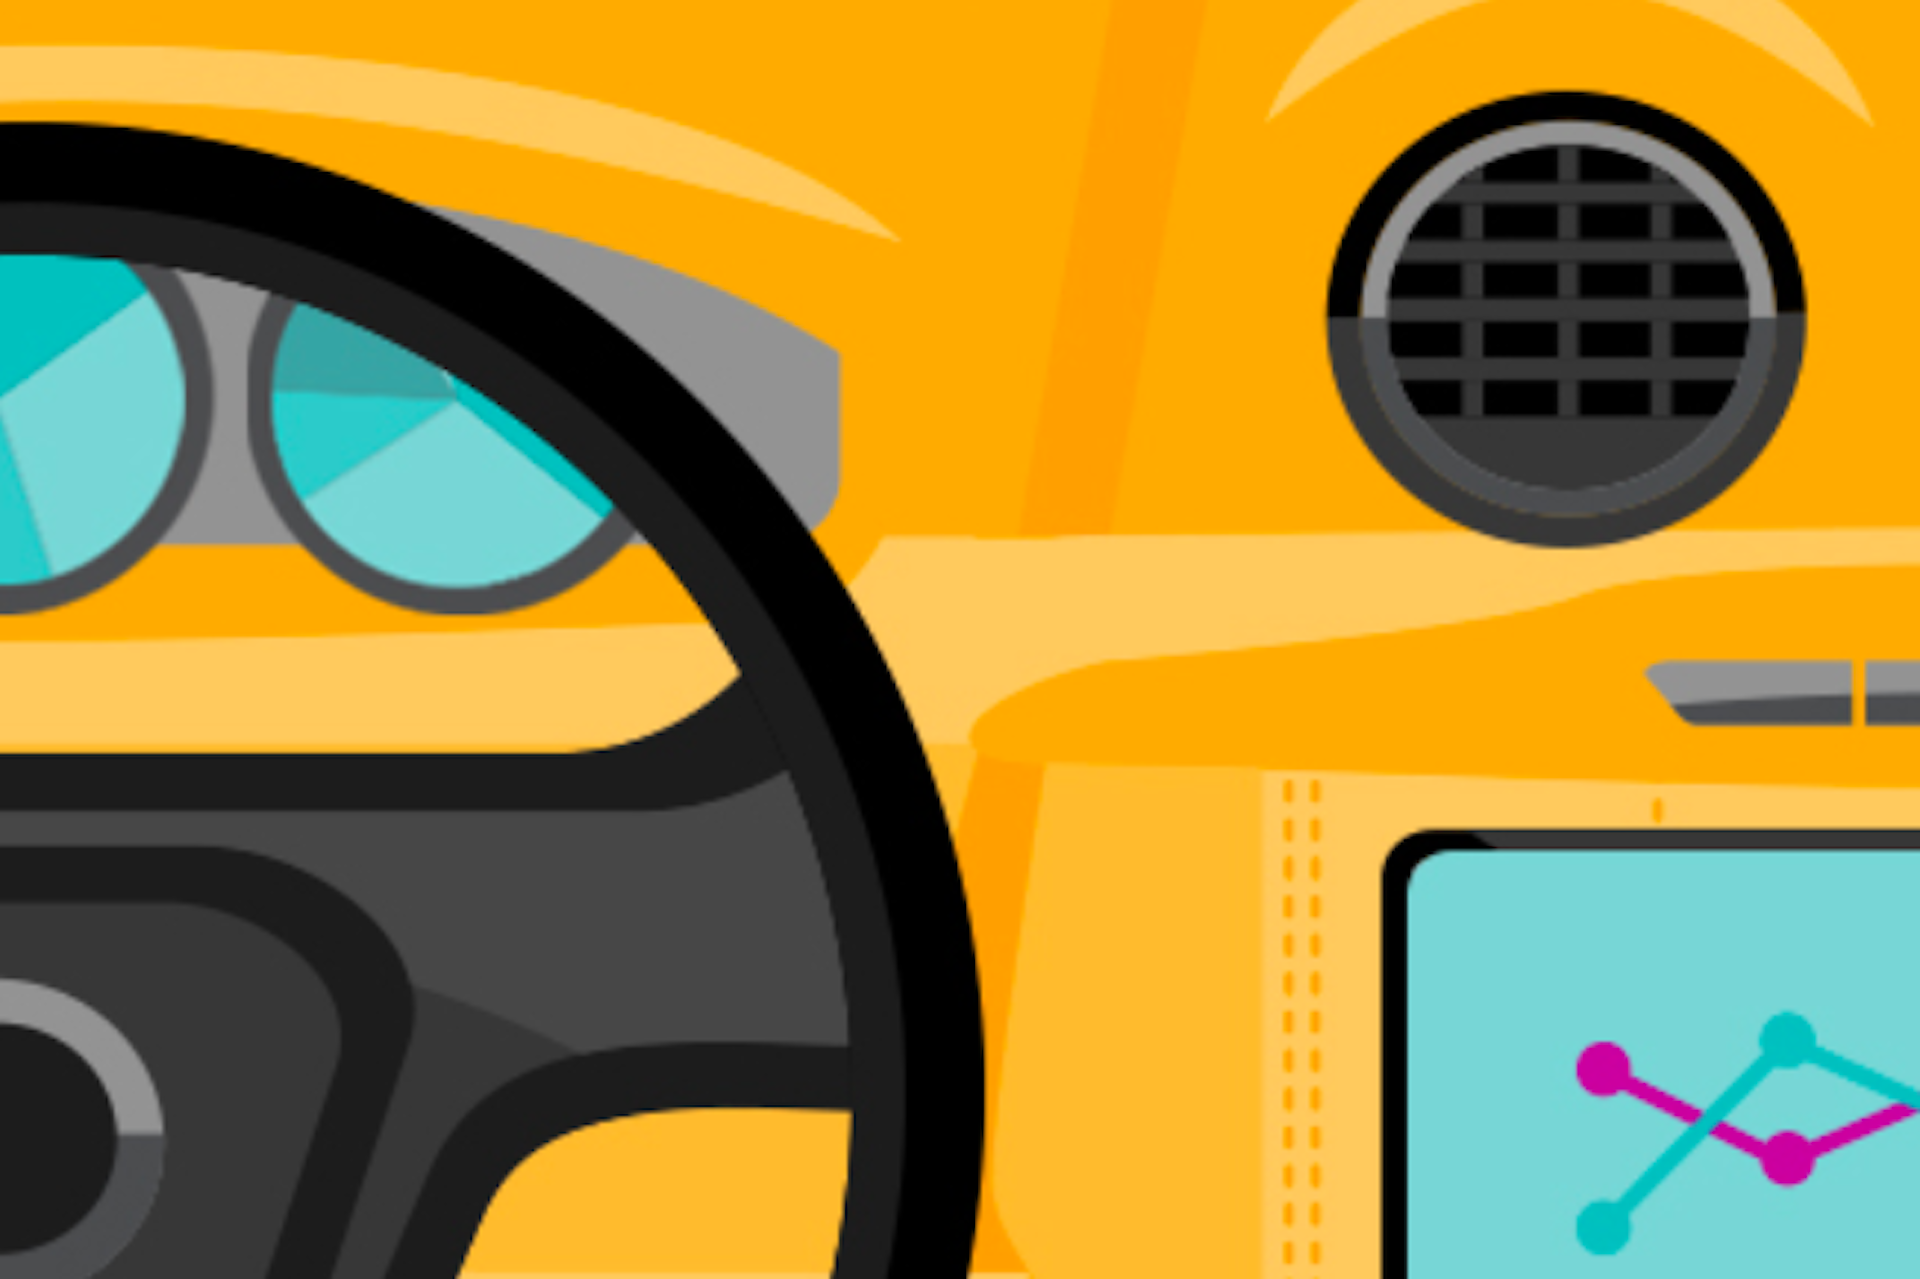 Illustration of a car dashboard on a yellow background